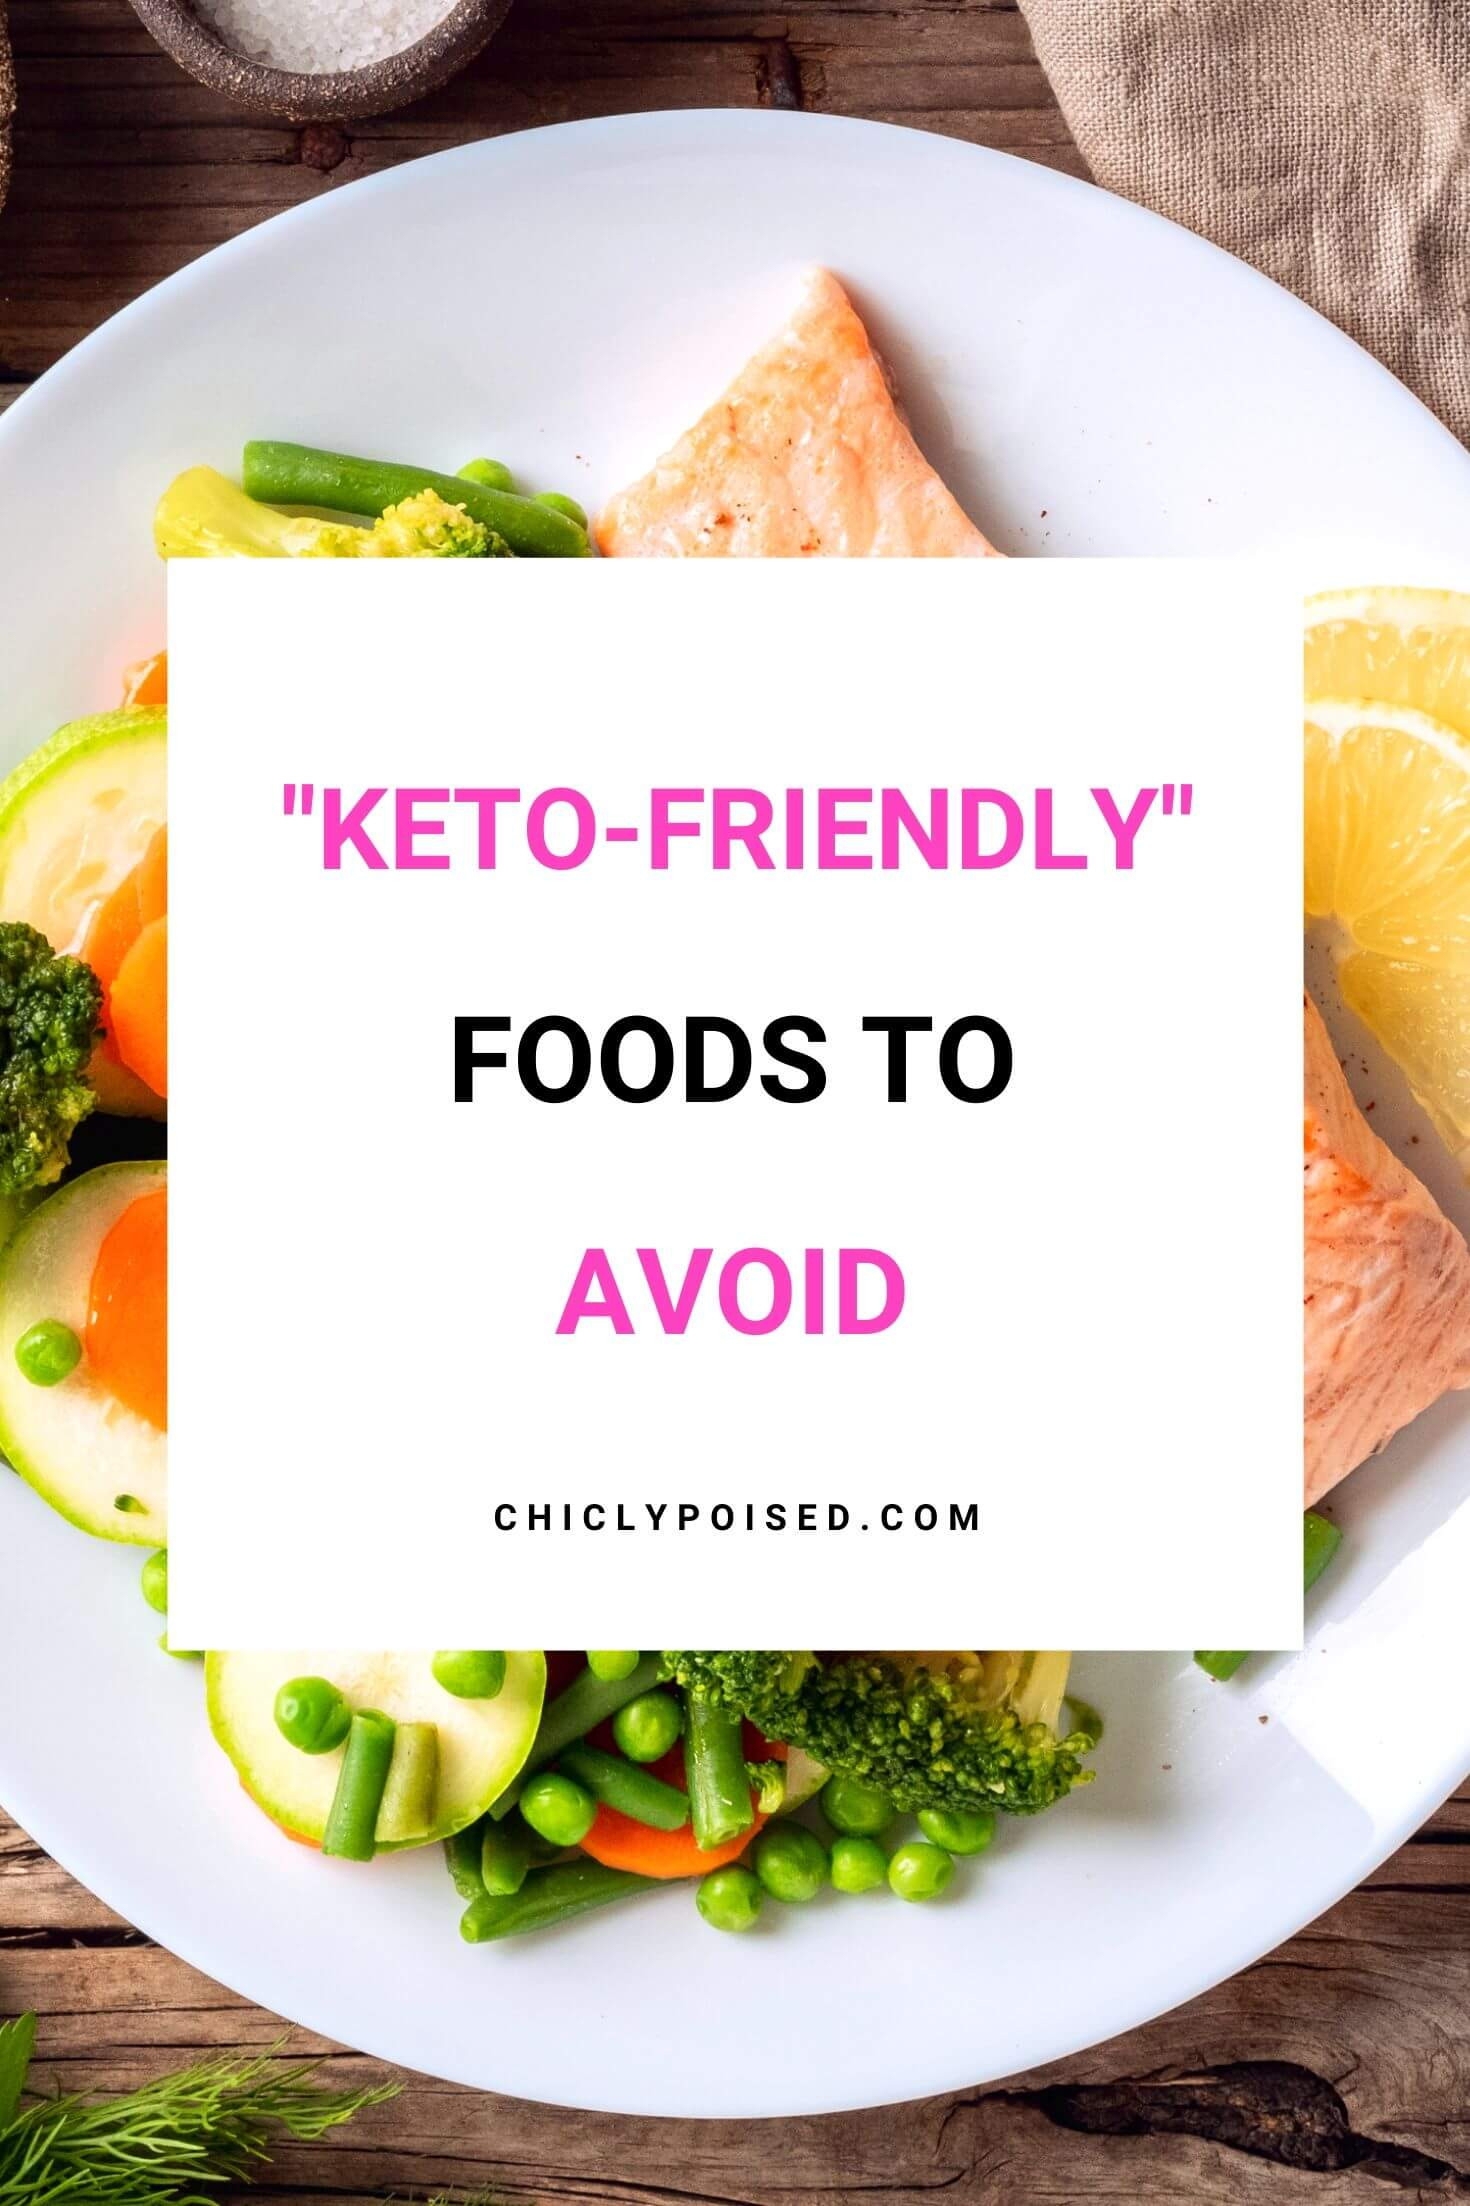 Keto Diet Migraines
 10 Keto Friendly Foods to Avoid to Reduce and Prevent